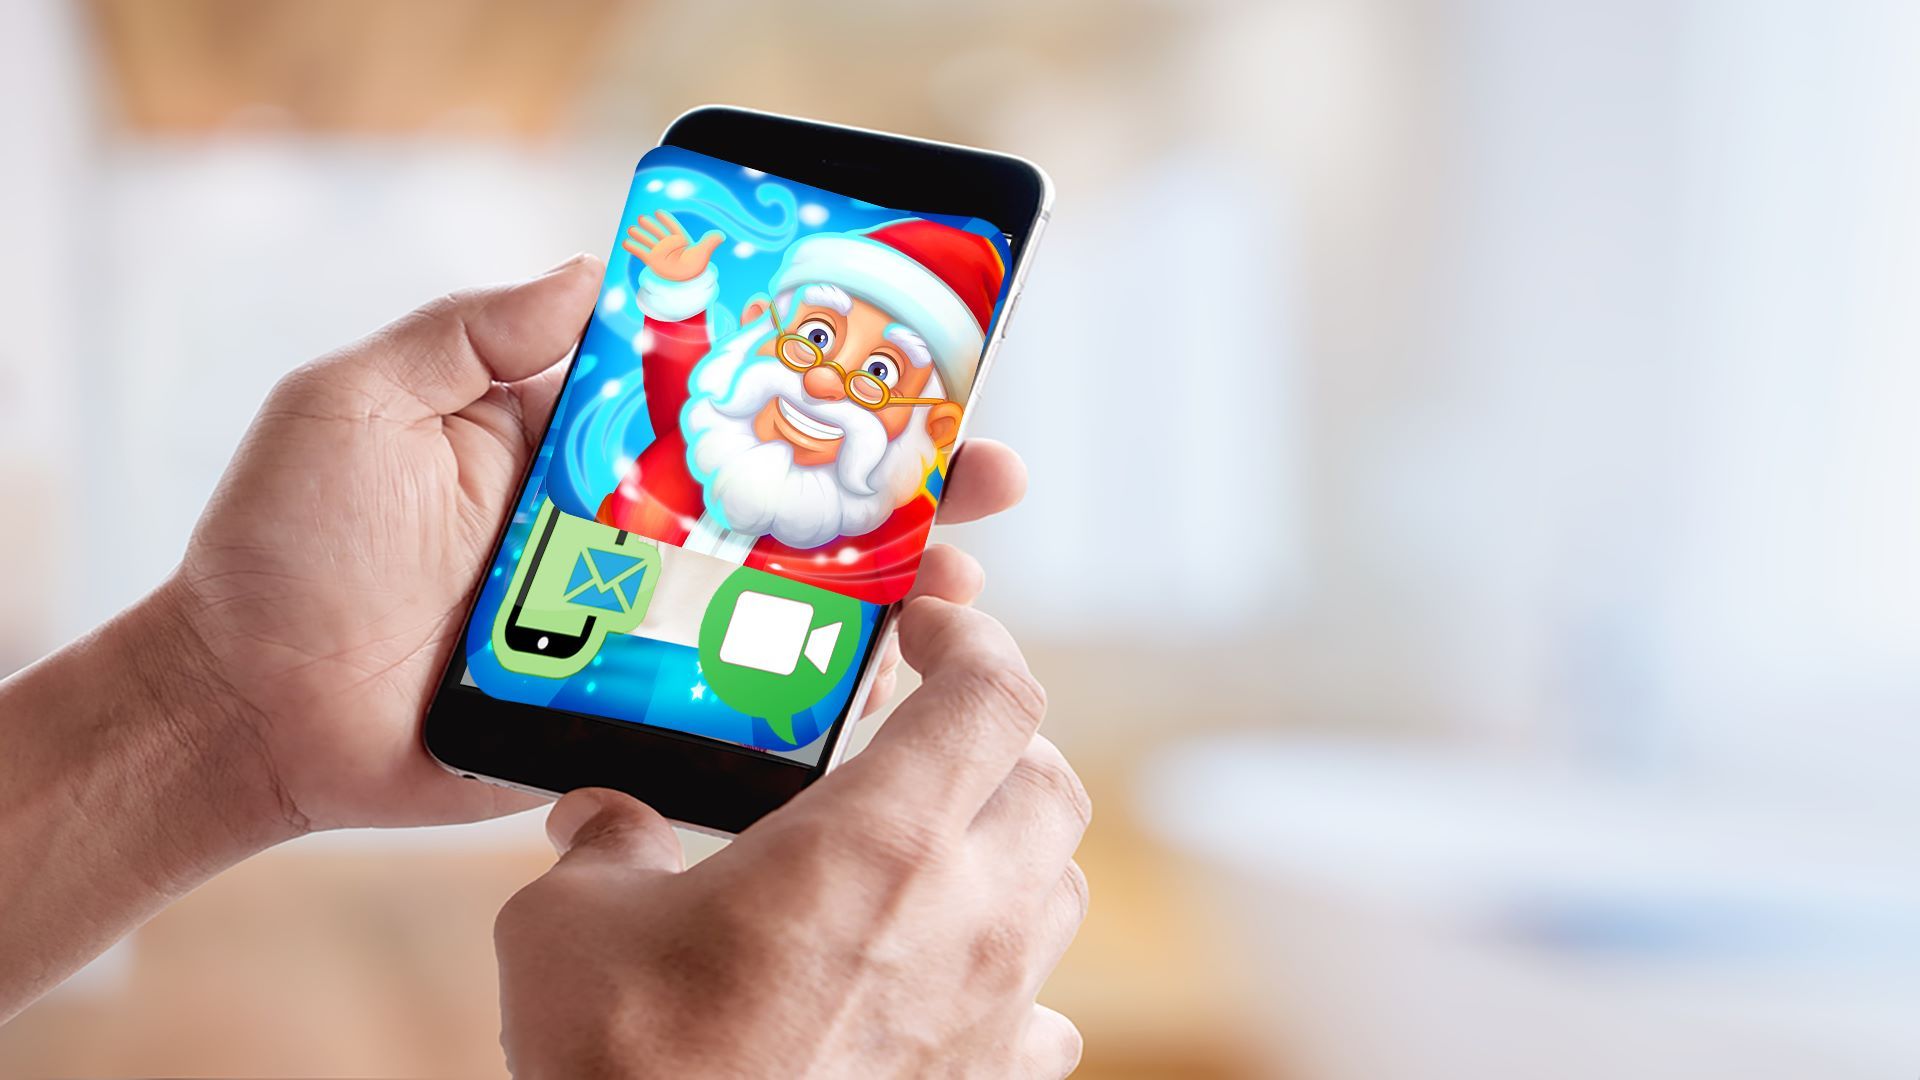 A Video Call From Santa Claus - Free Text Message :fake chat free games